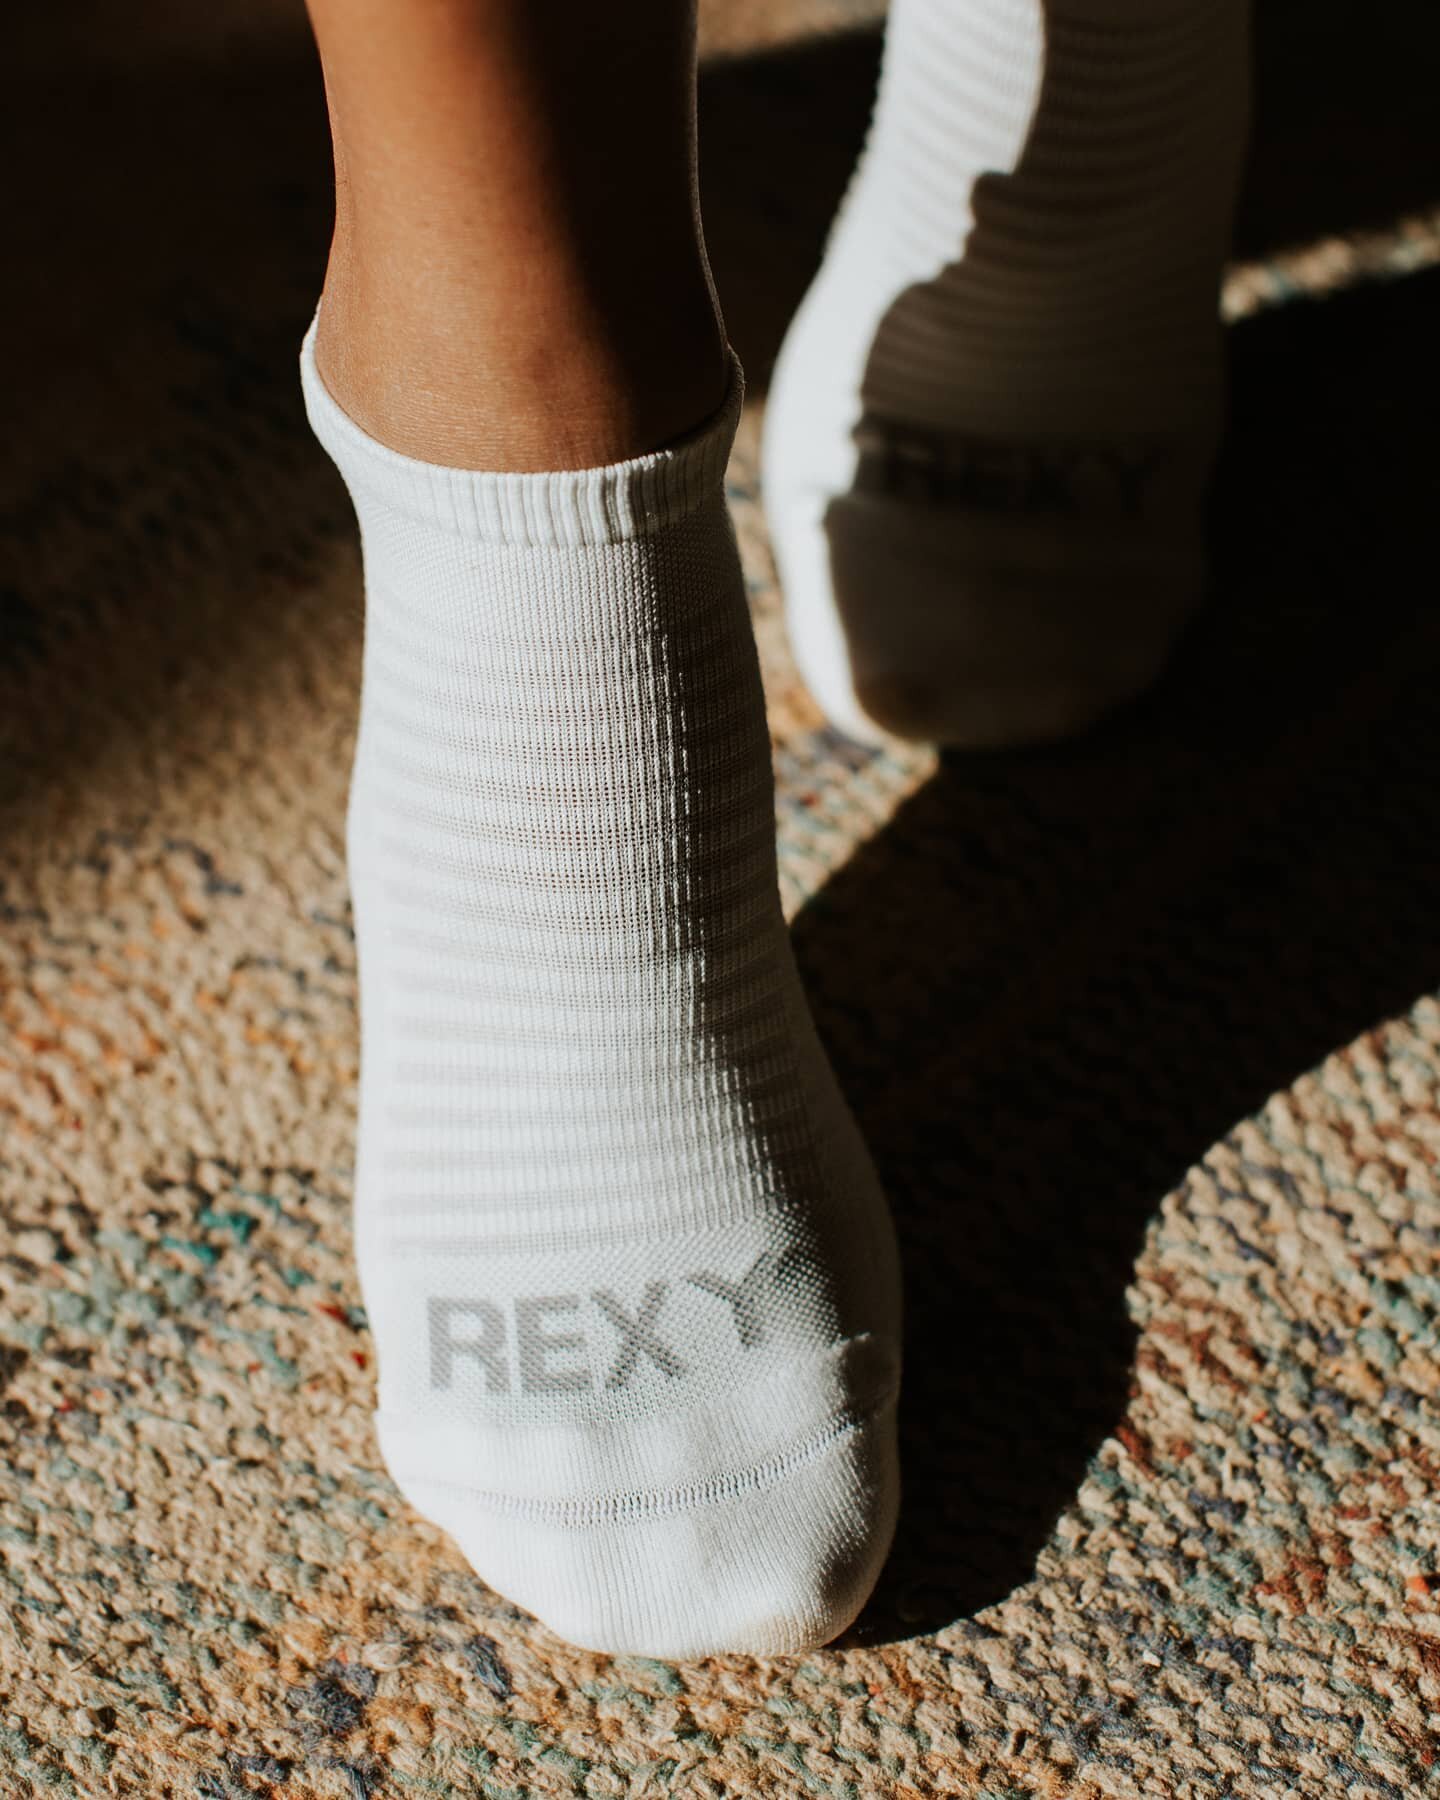 Getting down in the details 🧦 Did you know our AquaX fabric is made to absorb moisture and dry quickly? The horizontal lines act as vents for your feet 🎉